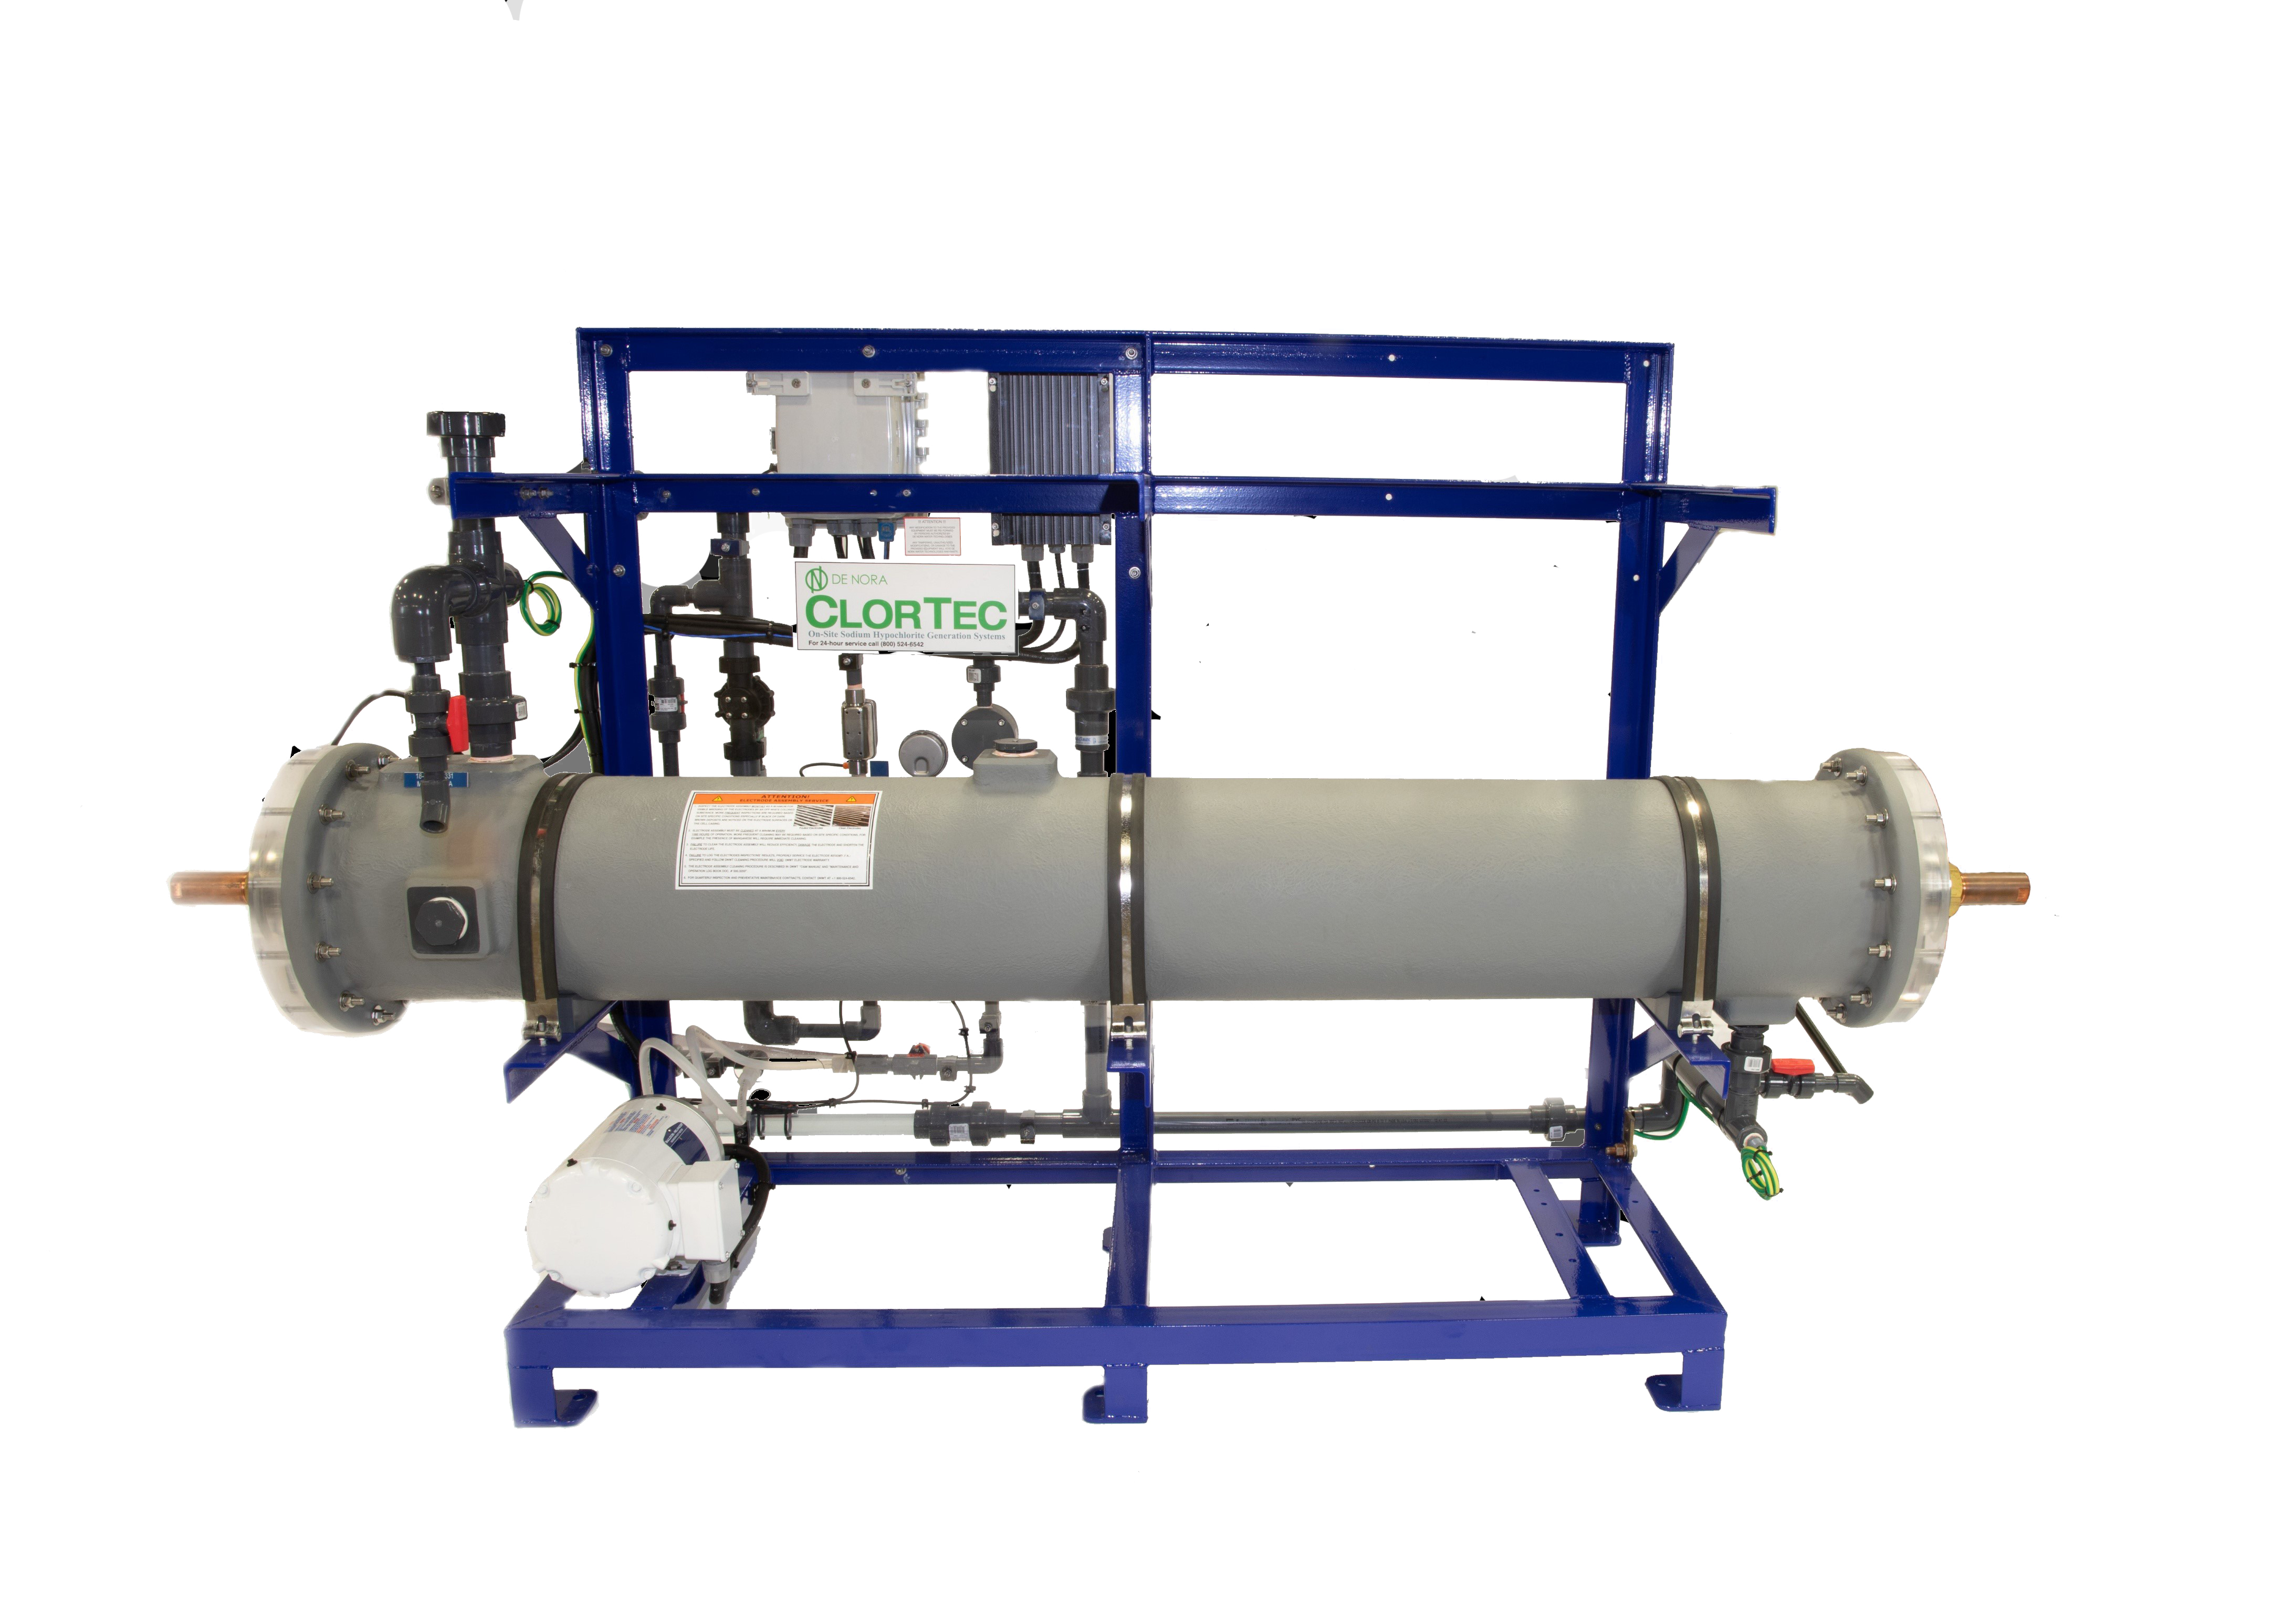 De Nora's ClorTec DN Gen II electrochlorination system will be launched at WEFTEC.